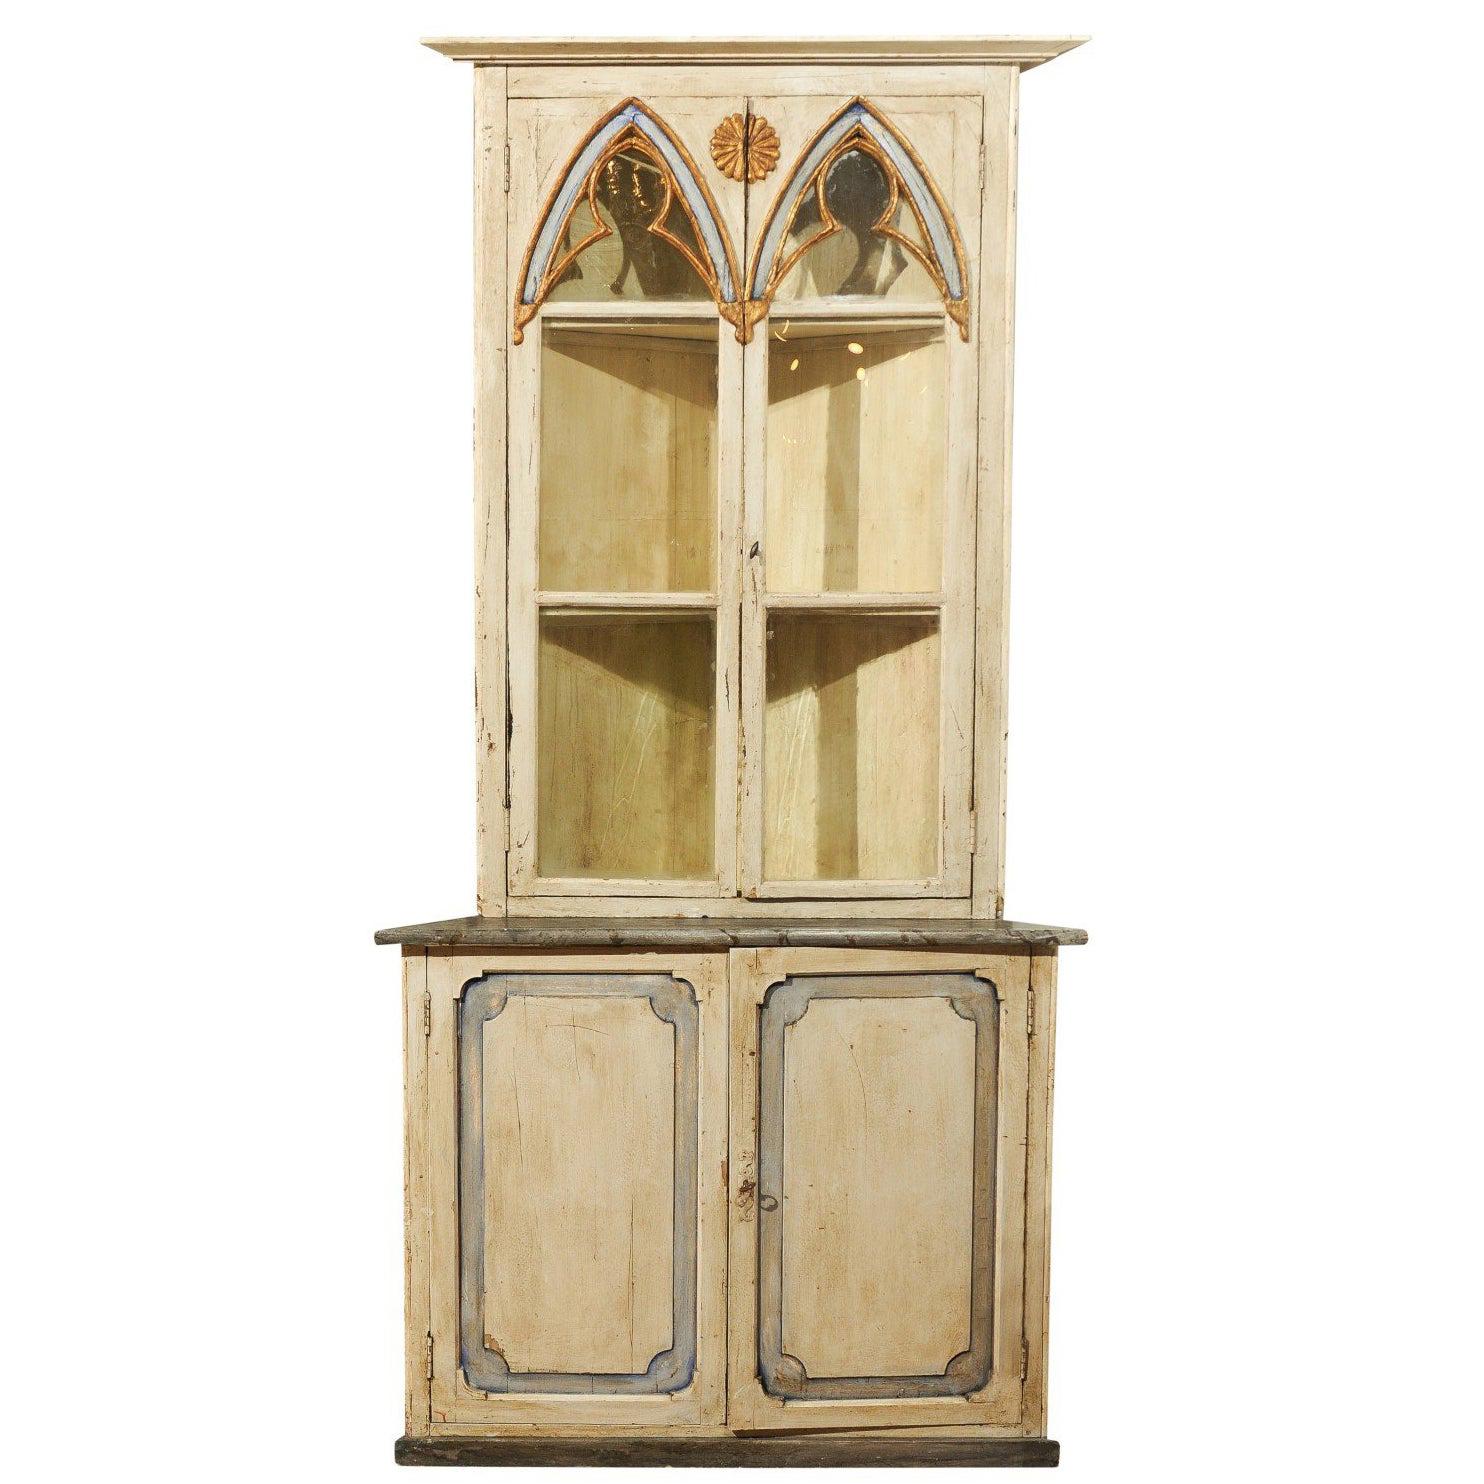 Swedish Gothic Revival Painted Wood Corner Cabinet with Glass Doors, circa 1830